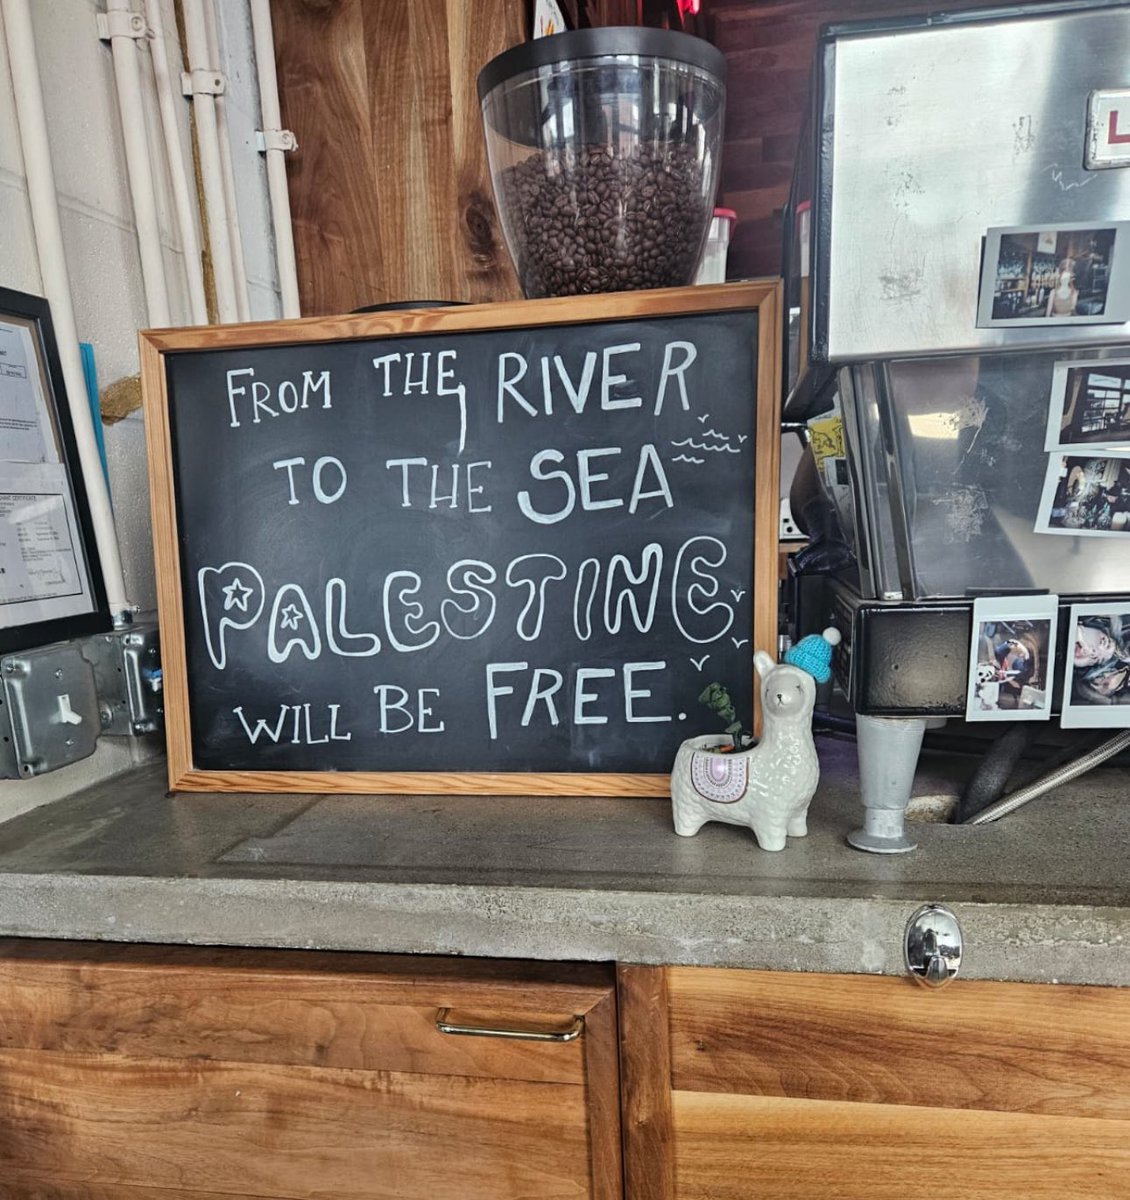 You did it, guys. You posted this at a coffee shop in Indiana and you freed Palestine. There’s peace in the Middle East now. Good work. 

(Also - a PSA don’t get coffee at Provider coffee in Indianapolis anymore. ✌️)